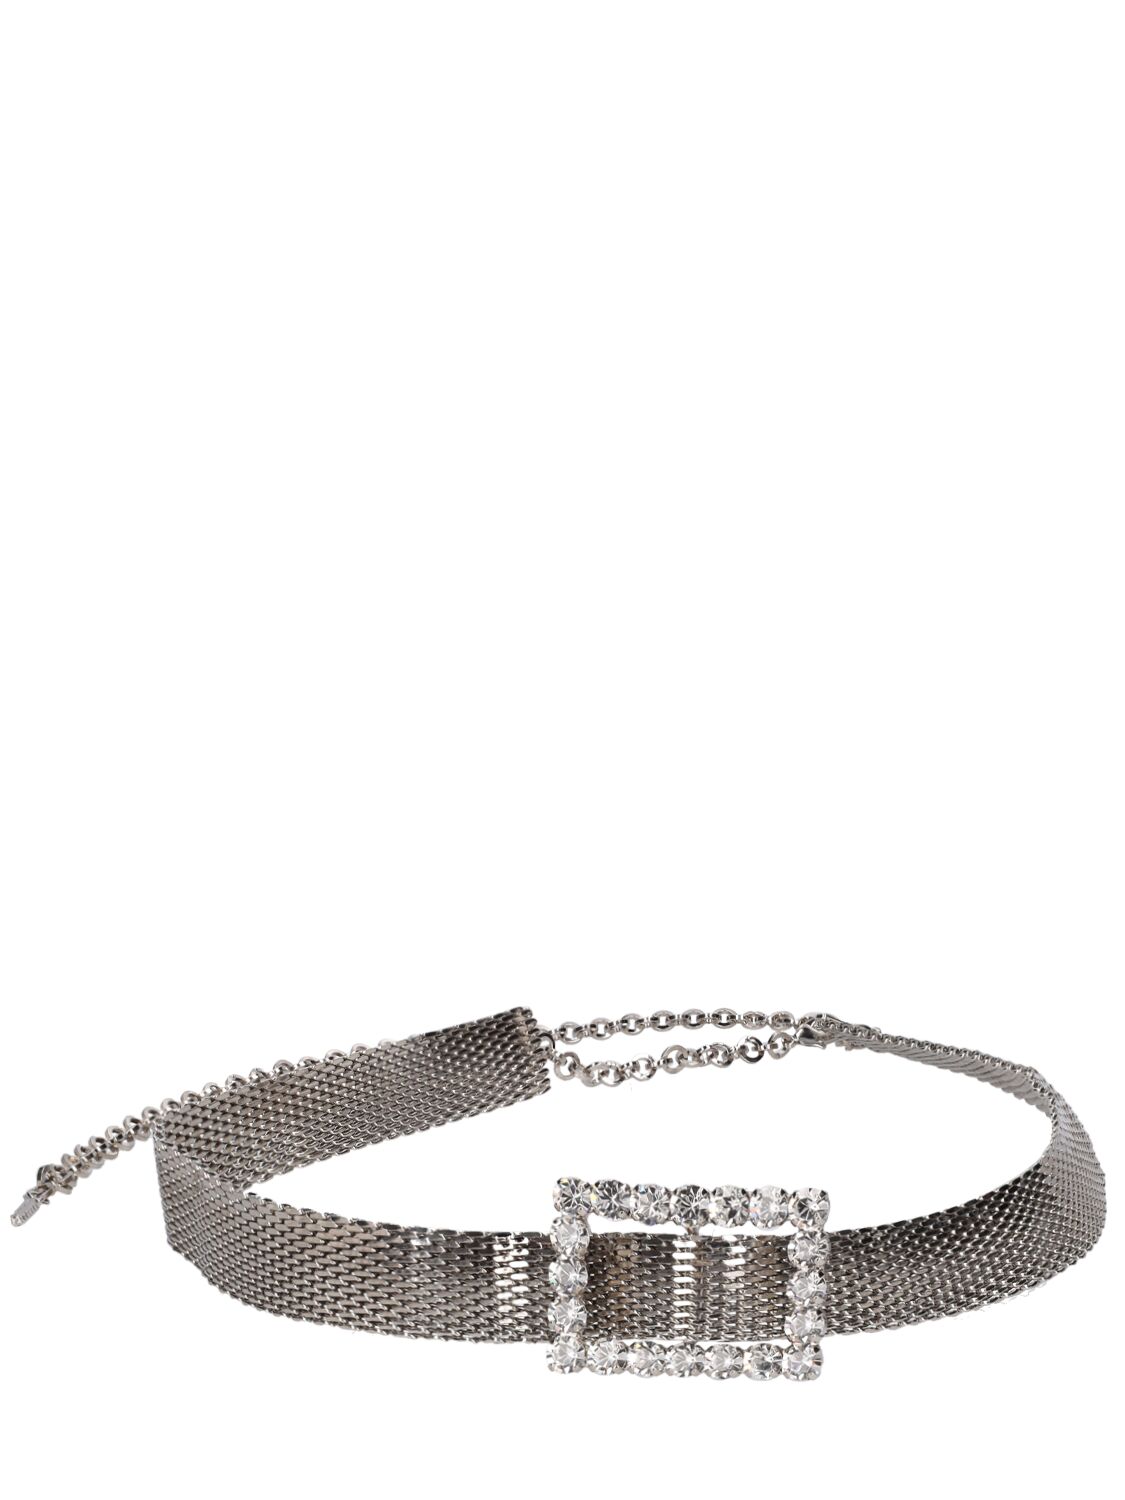 Image of Chain Belt W/ Crystal Buckle